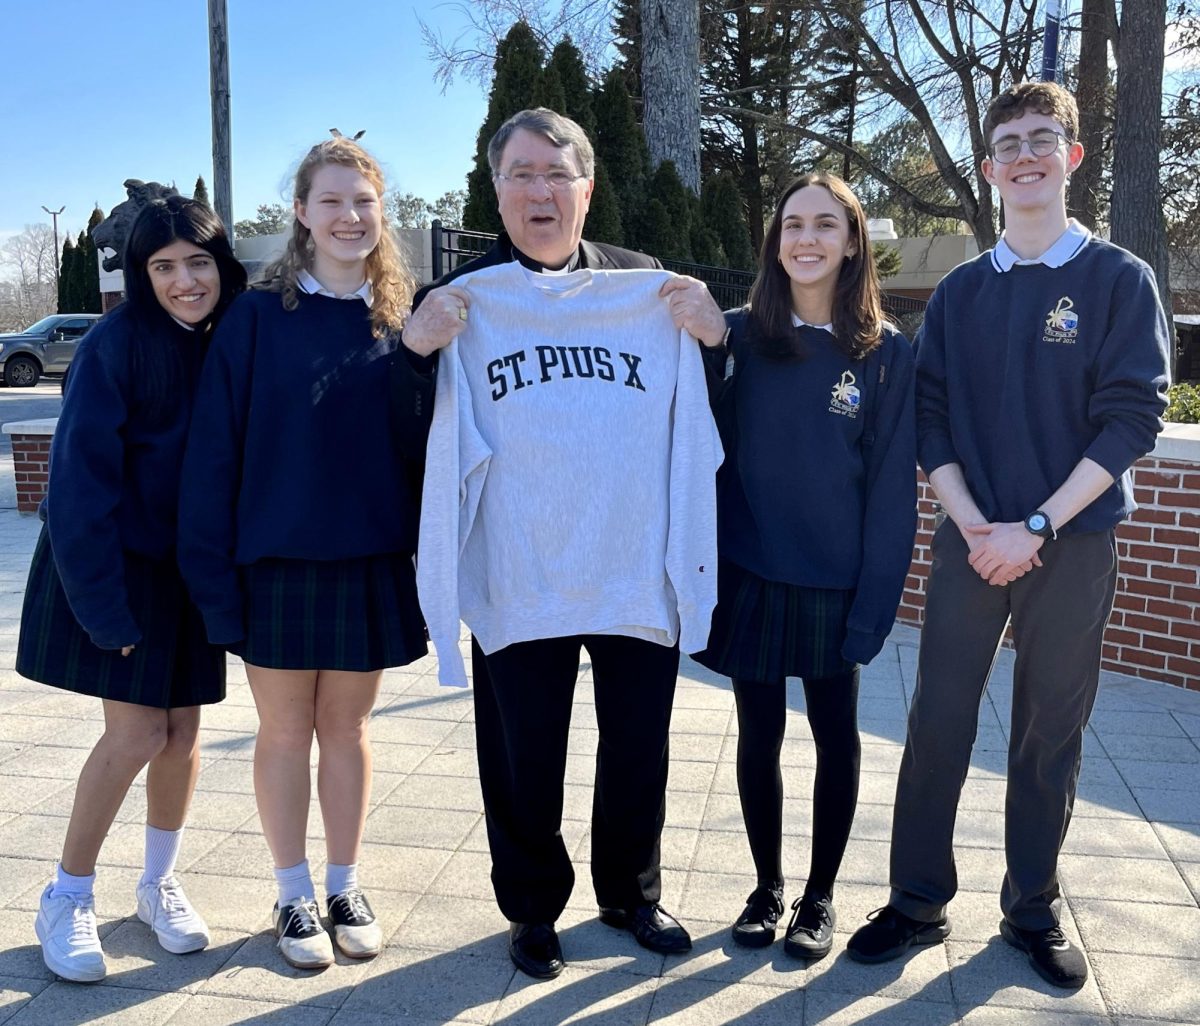 Seniors+Aryana+Wadhwani%2C+Molly+Pitra%2C+Thea+Winckler%2C+and+Shane+Donnelly+take+a+picture+with+the+Papal+Nuncio+while+giving+him+a+tour+of+the+school+in+Fench%2C+his+native+language.